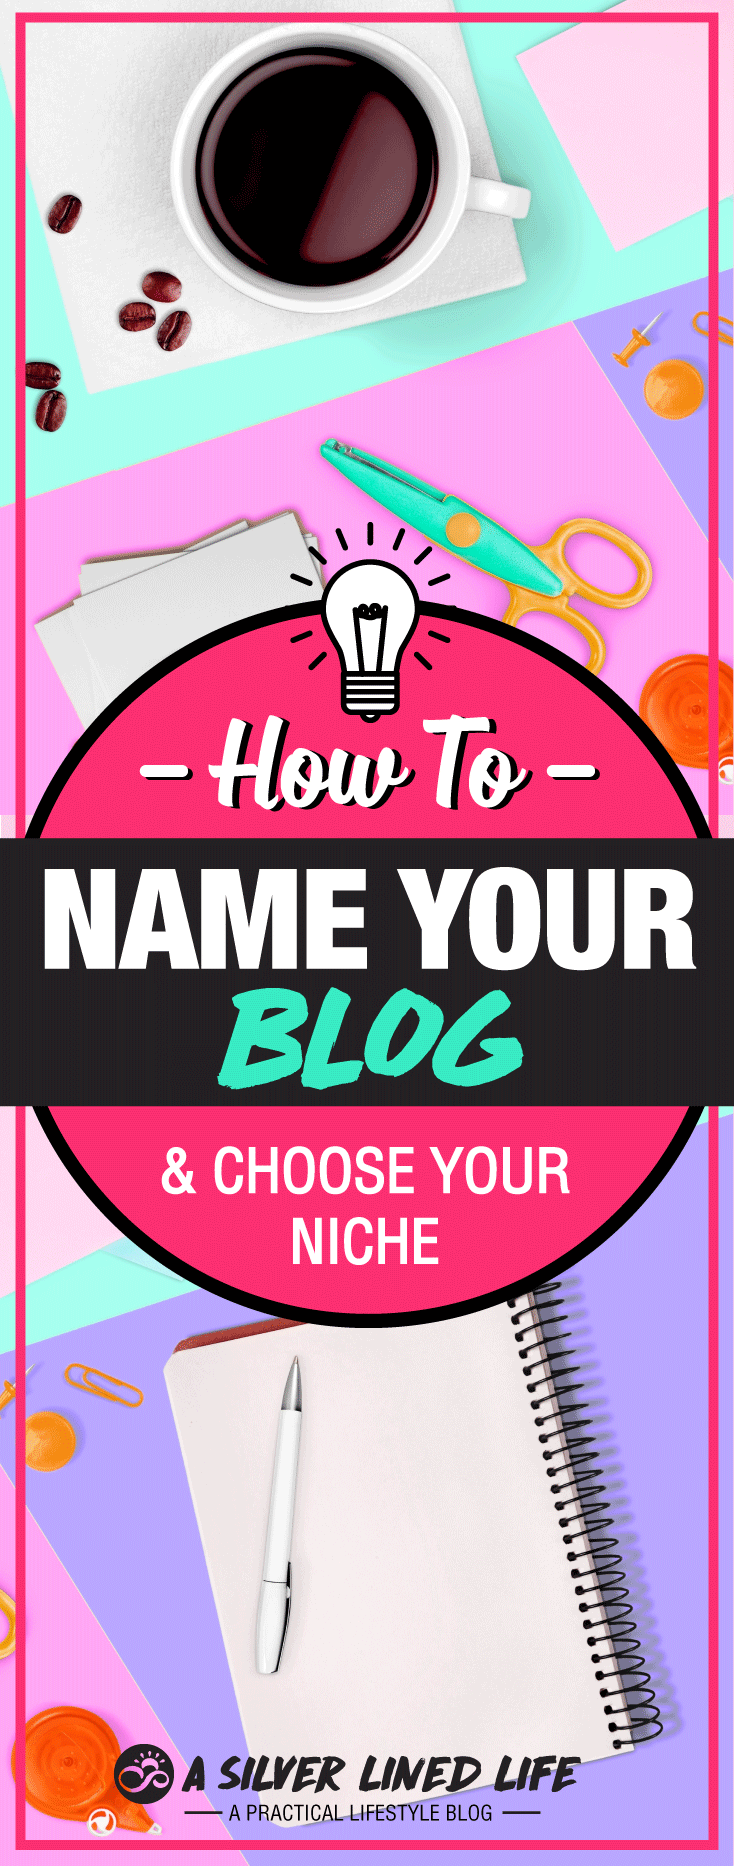 How to Name Your Blog And Choose Your Niche - Awesome blog tips for beginners! Great ideas to start a blog!!